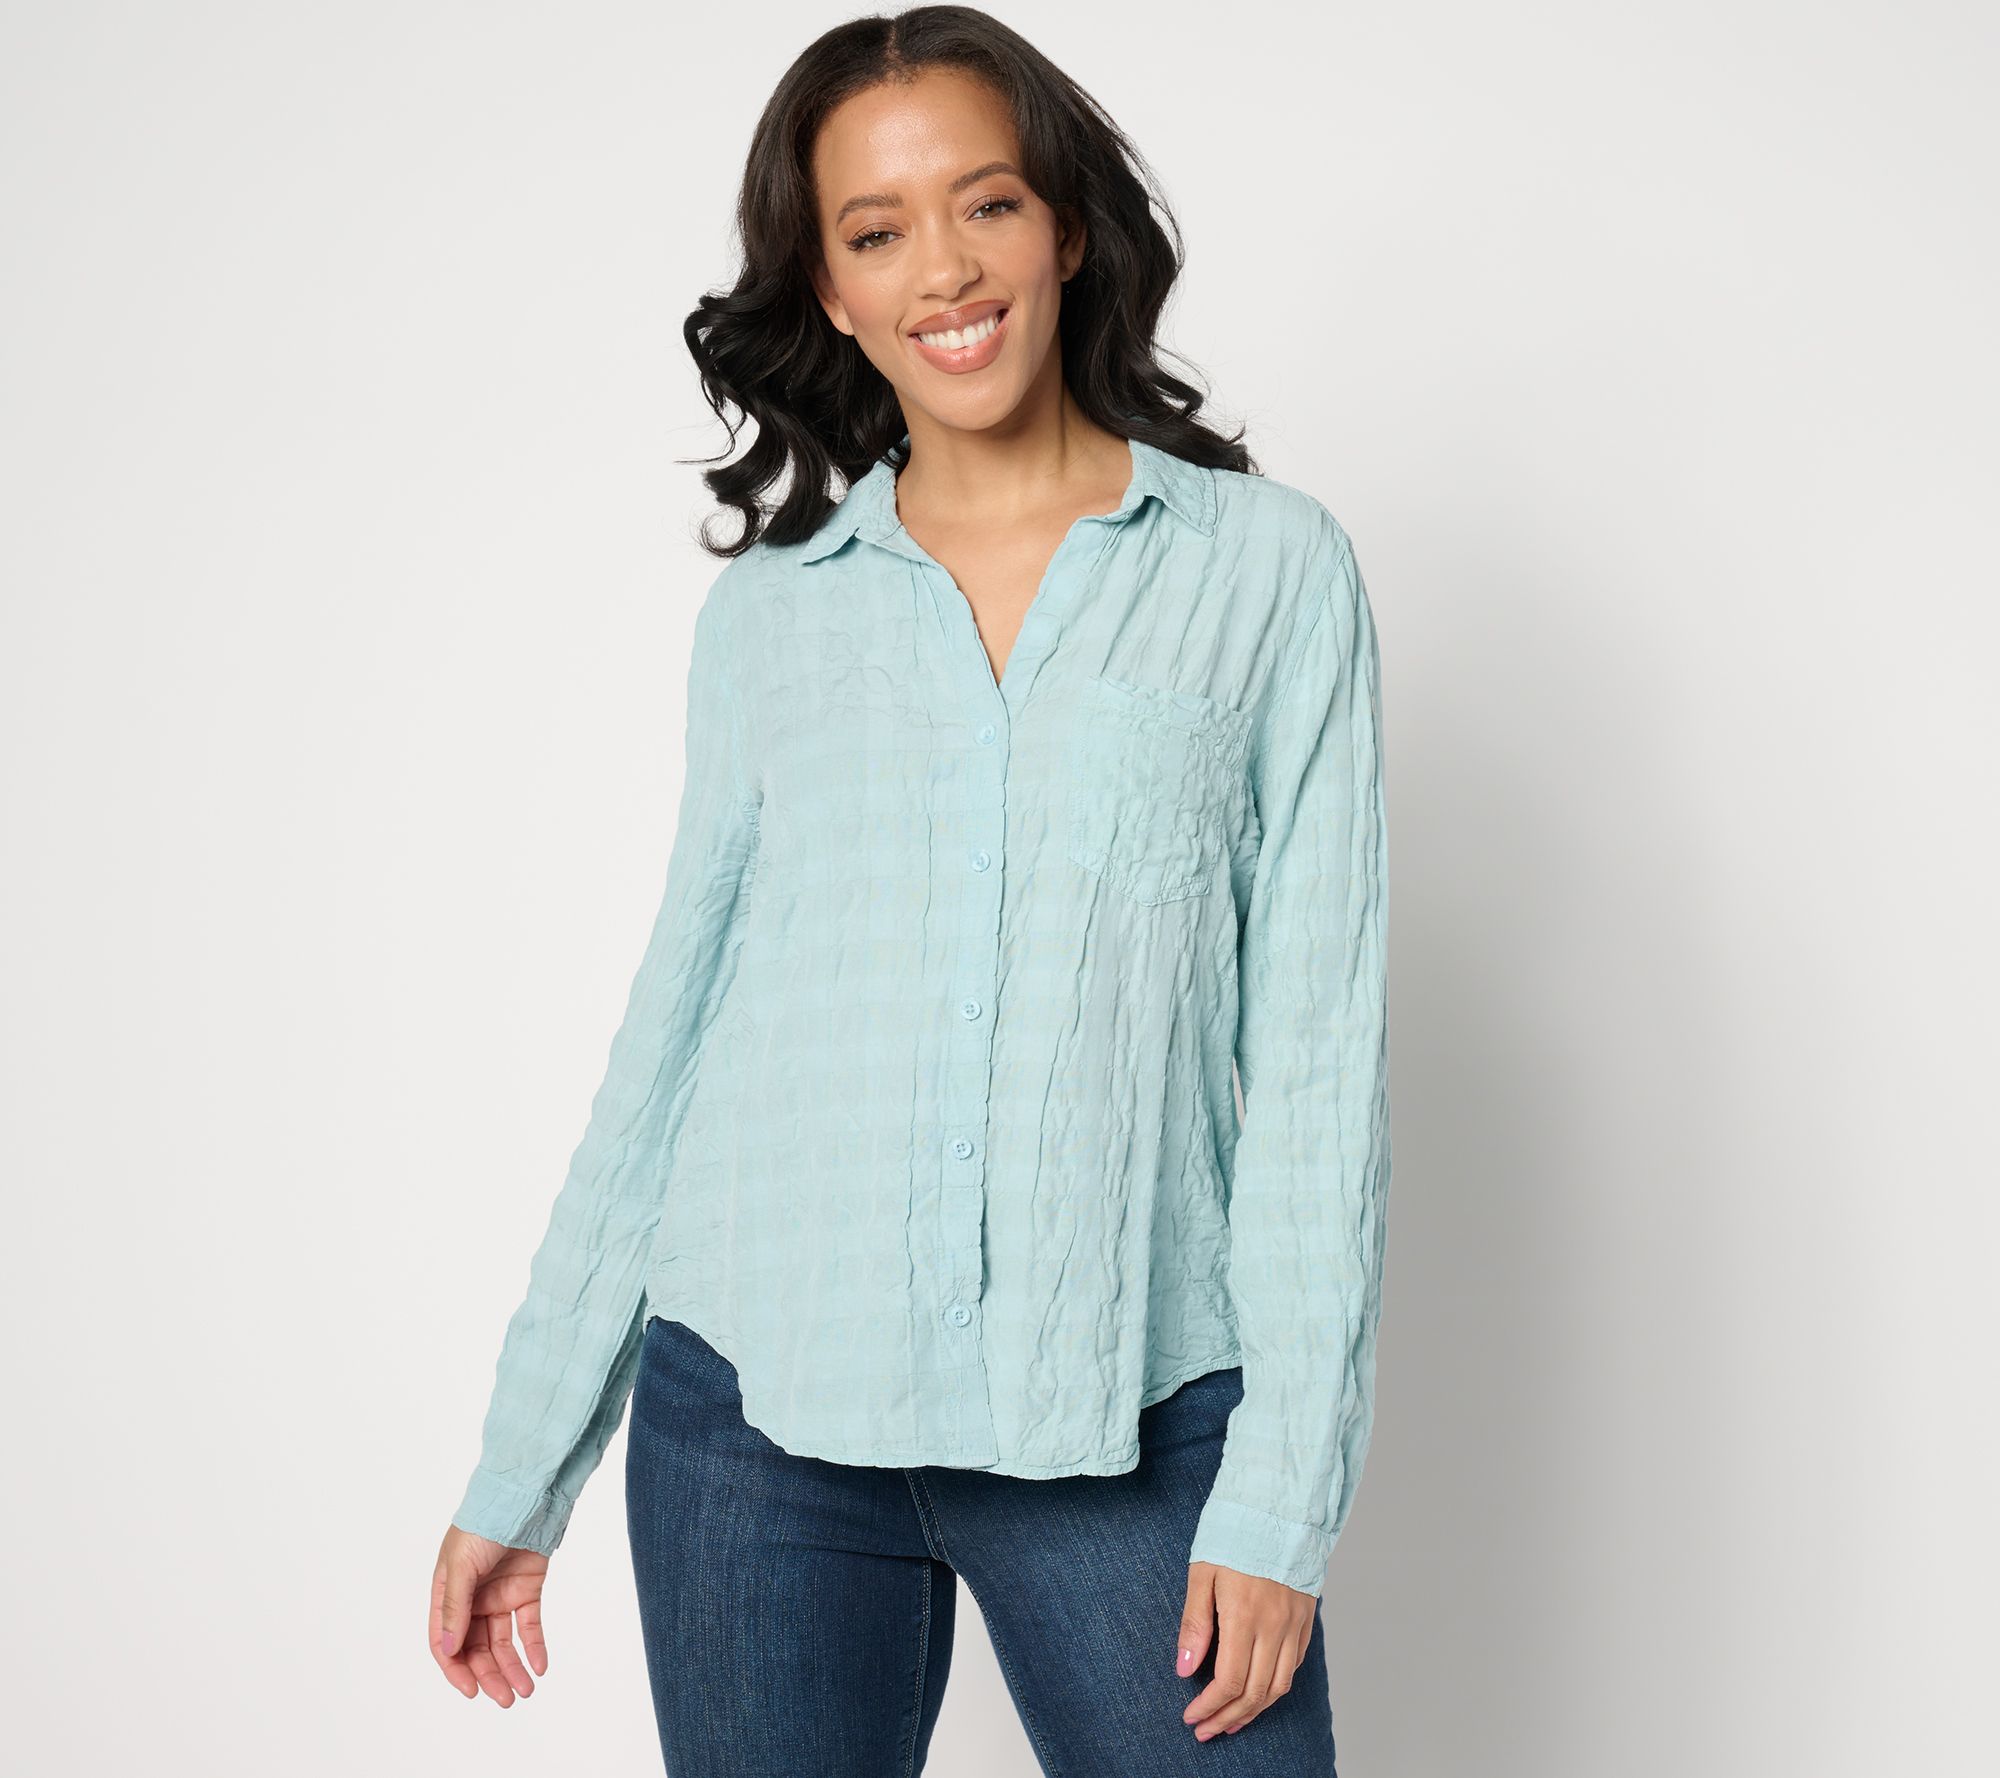 Shop Women's Blouses, Tops & Shirts for Every Occasion 